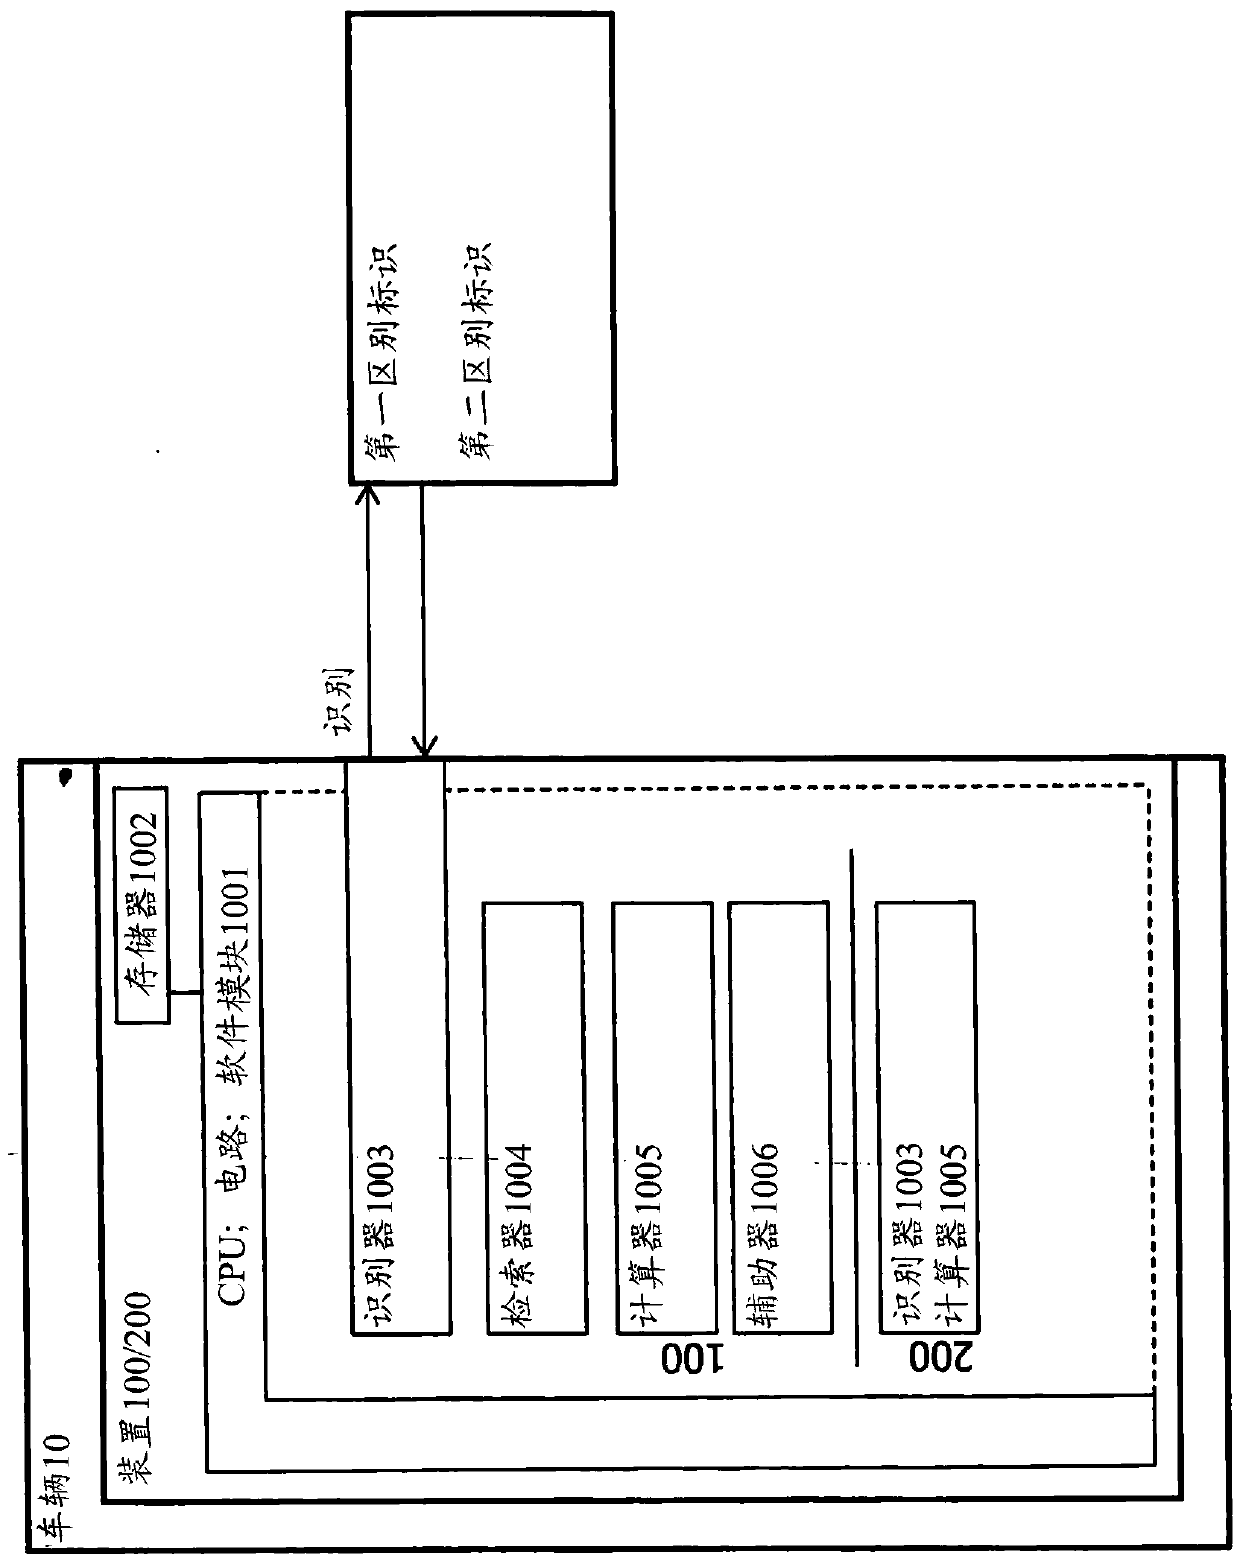 Method and device for assisting driving of a vehicle